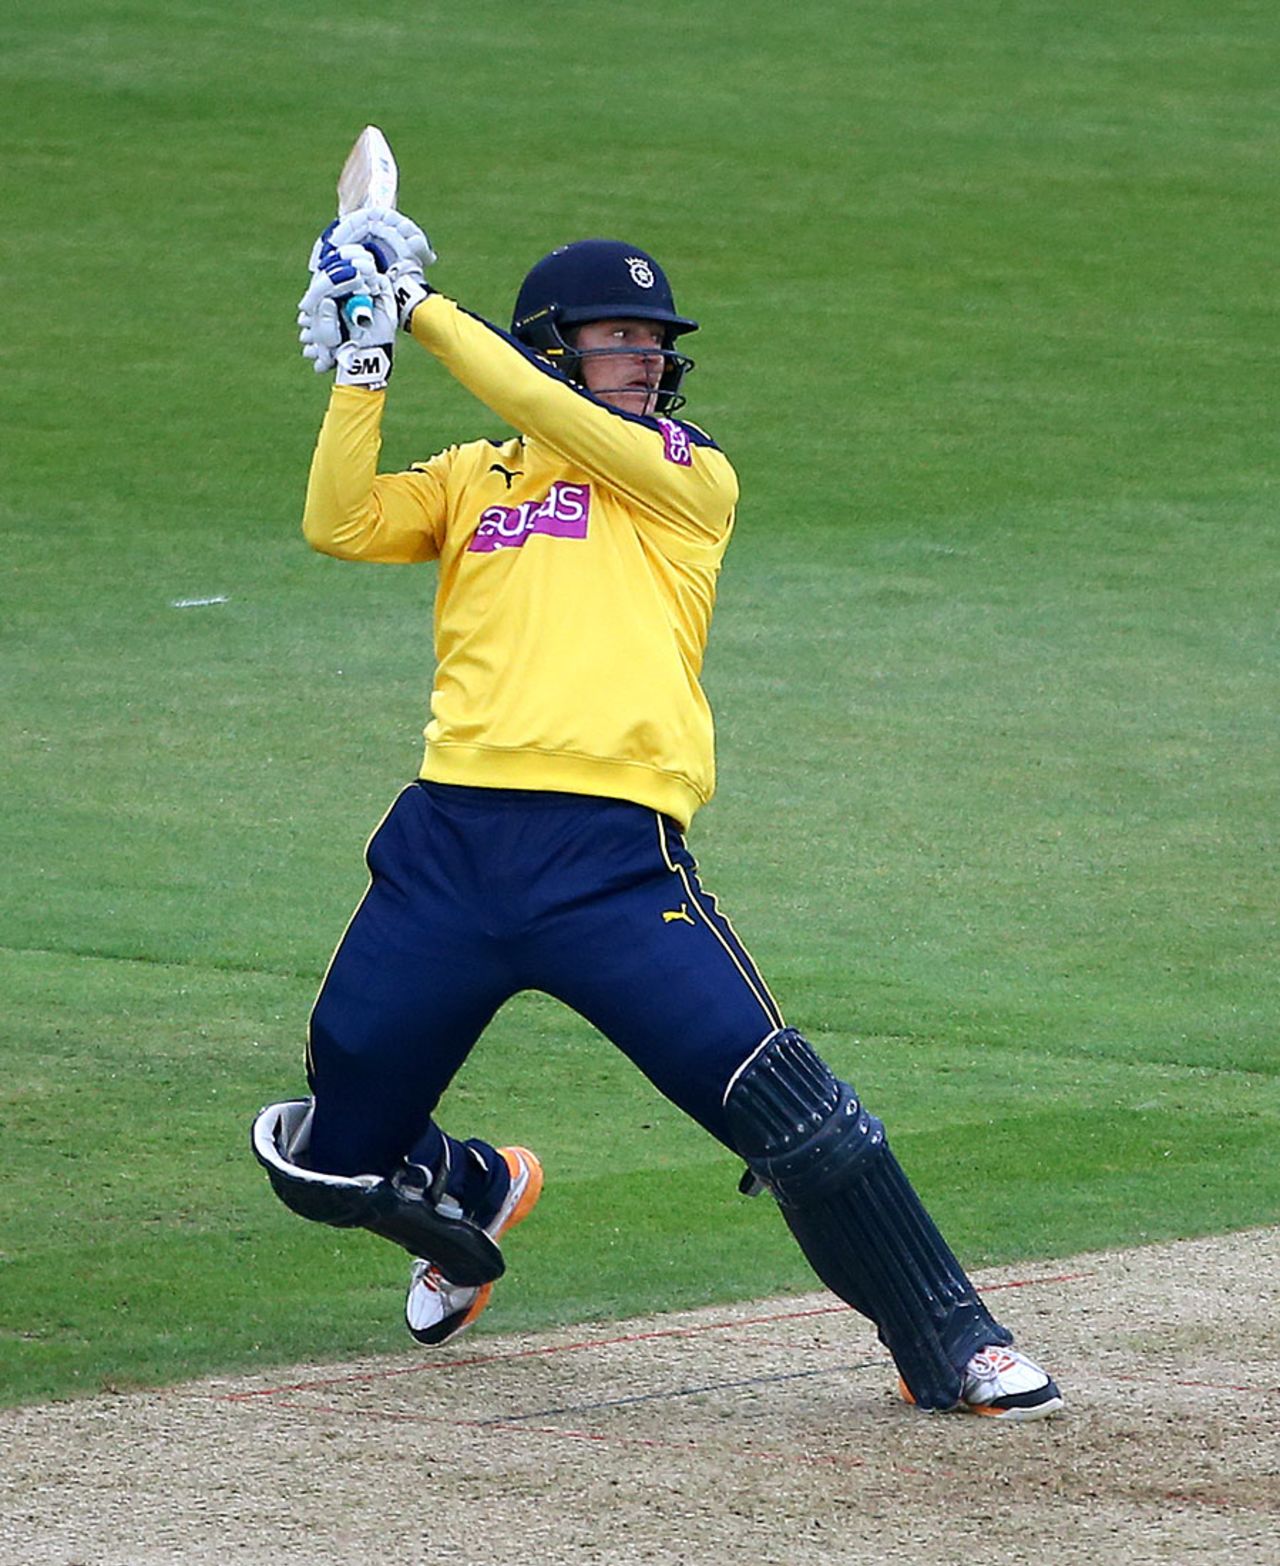 Jimmy Adams powers through the off side, Hampshire v Essex, NatWest T20 Blast, South Group, Ageas Bowl, May 15, 2015